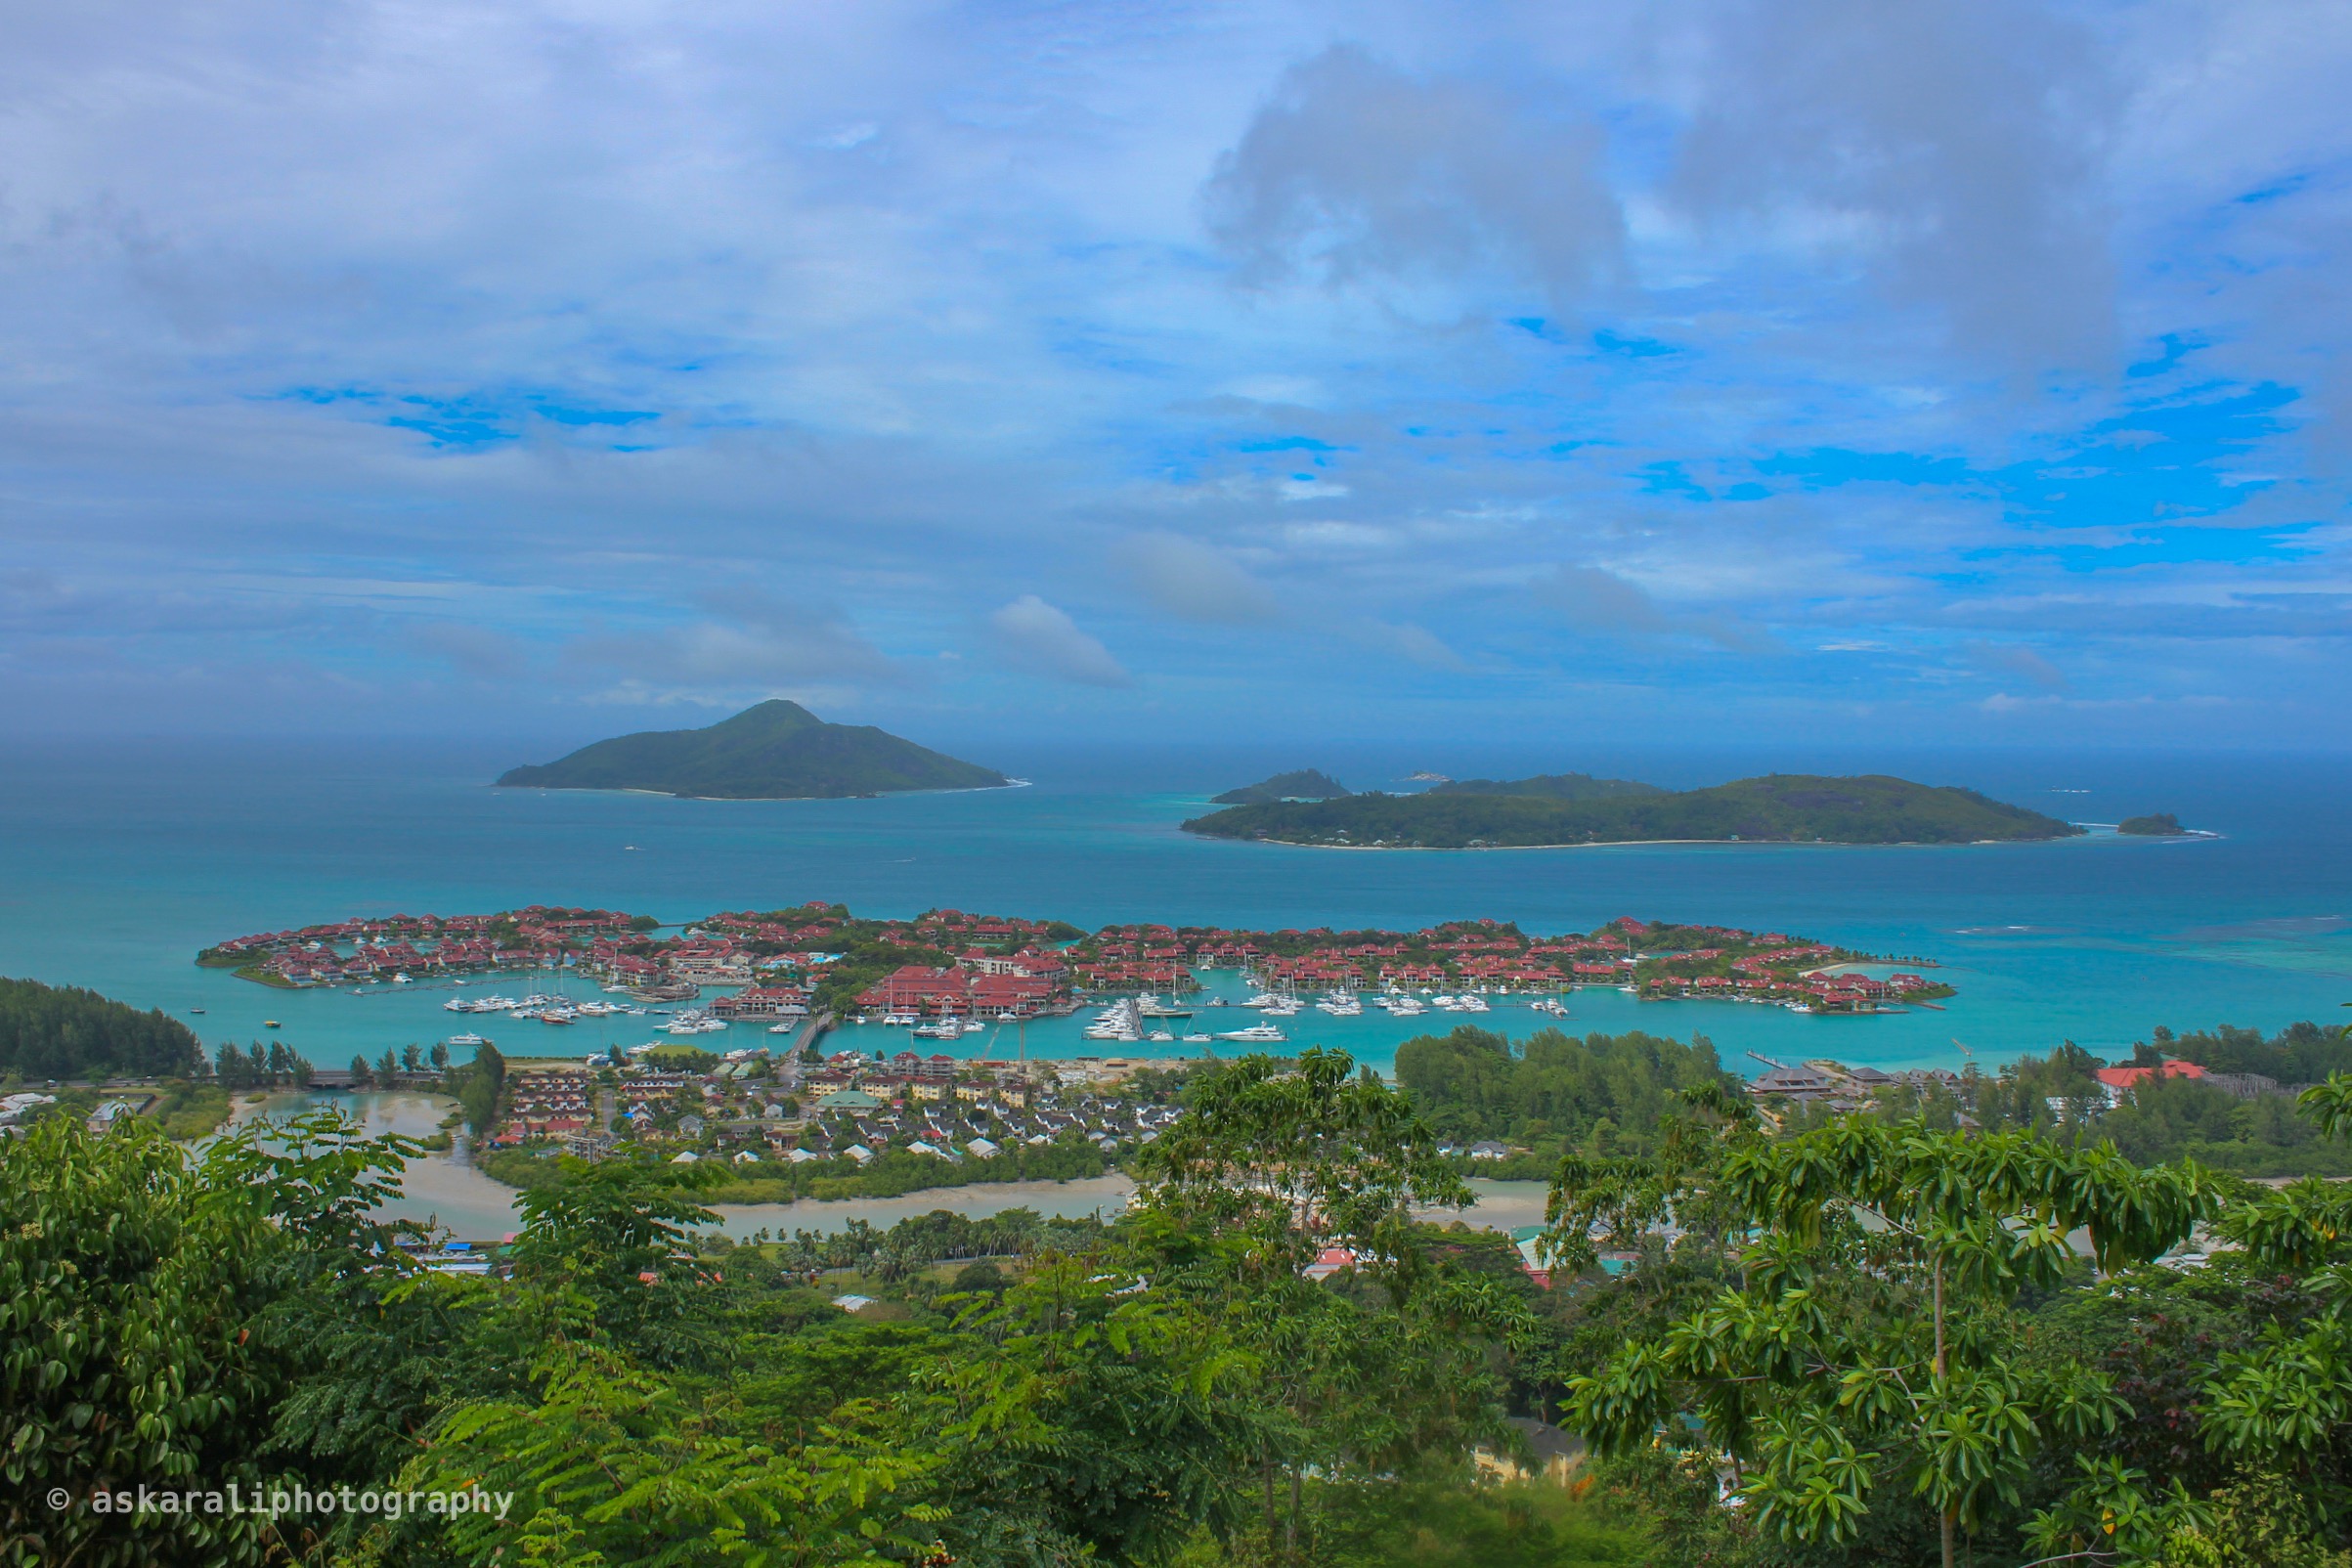 The amazing Eden Island from a view point of seychelles. To capture this, I drove to the view point and saw the the breathtaking view of the Eden Island and sat until I get a night view of the island.